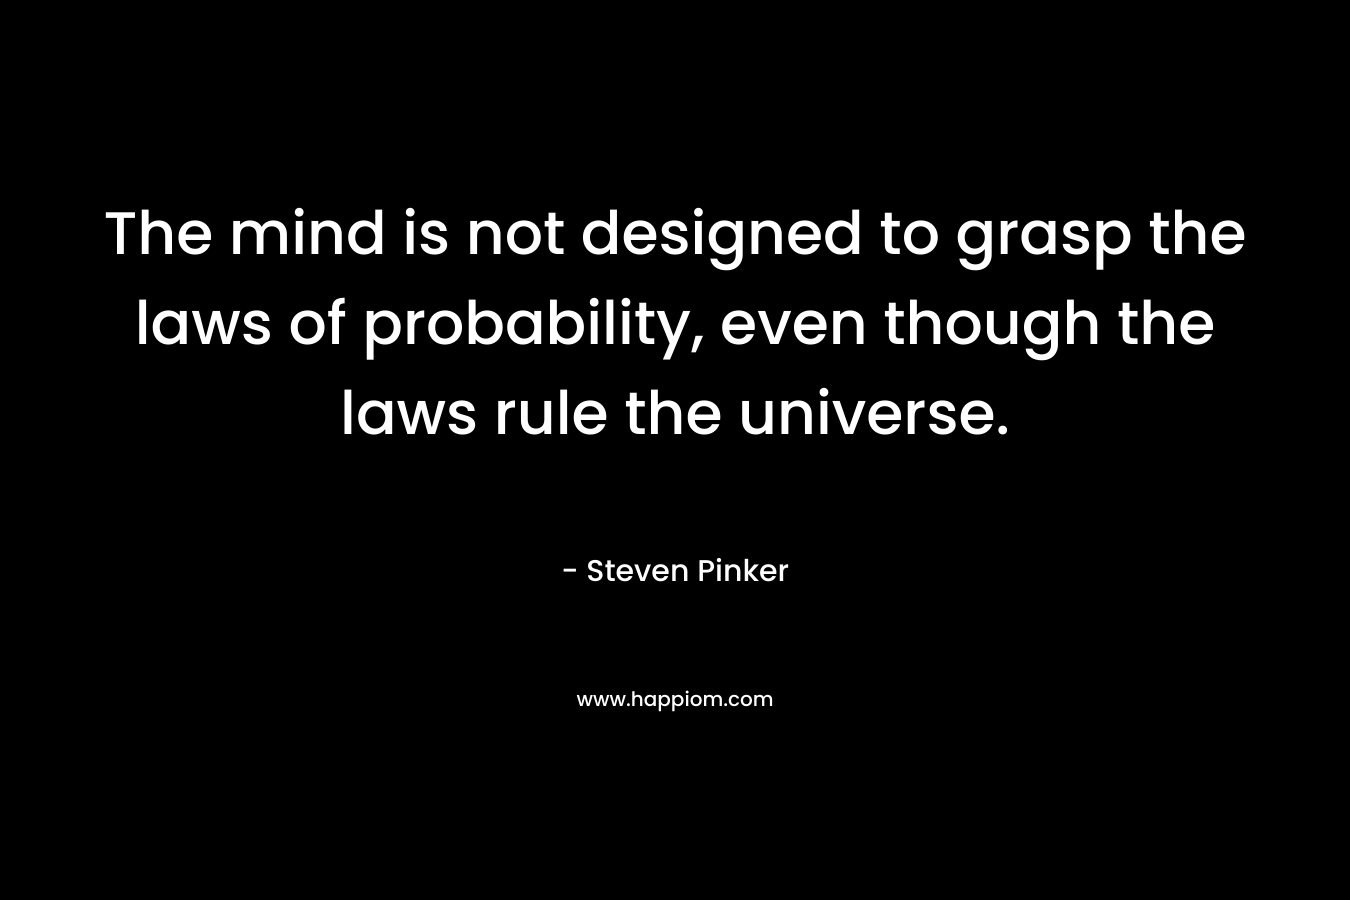 The mind is not designed to grasp the laws of probability, even though the laws rule the universe.